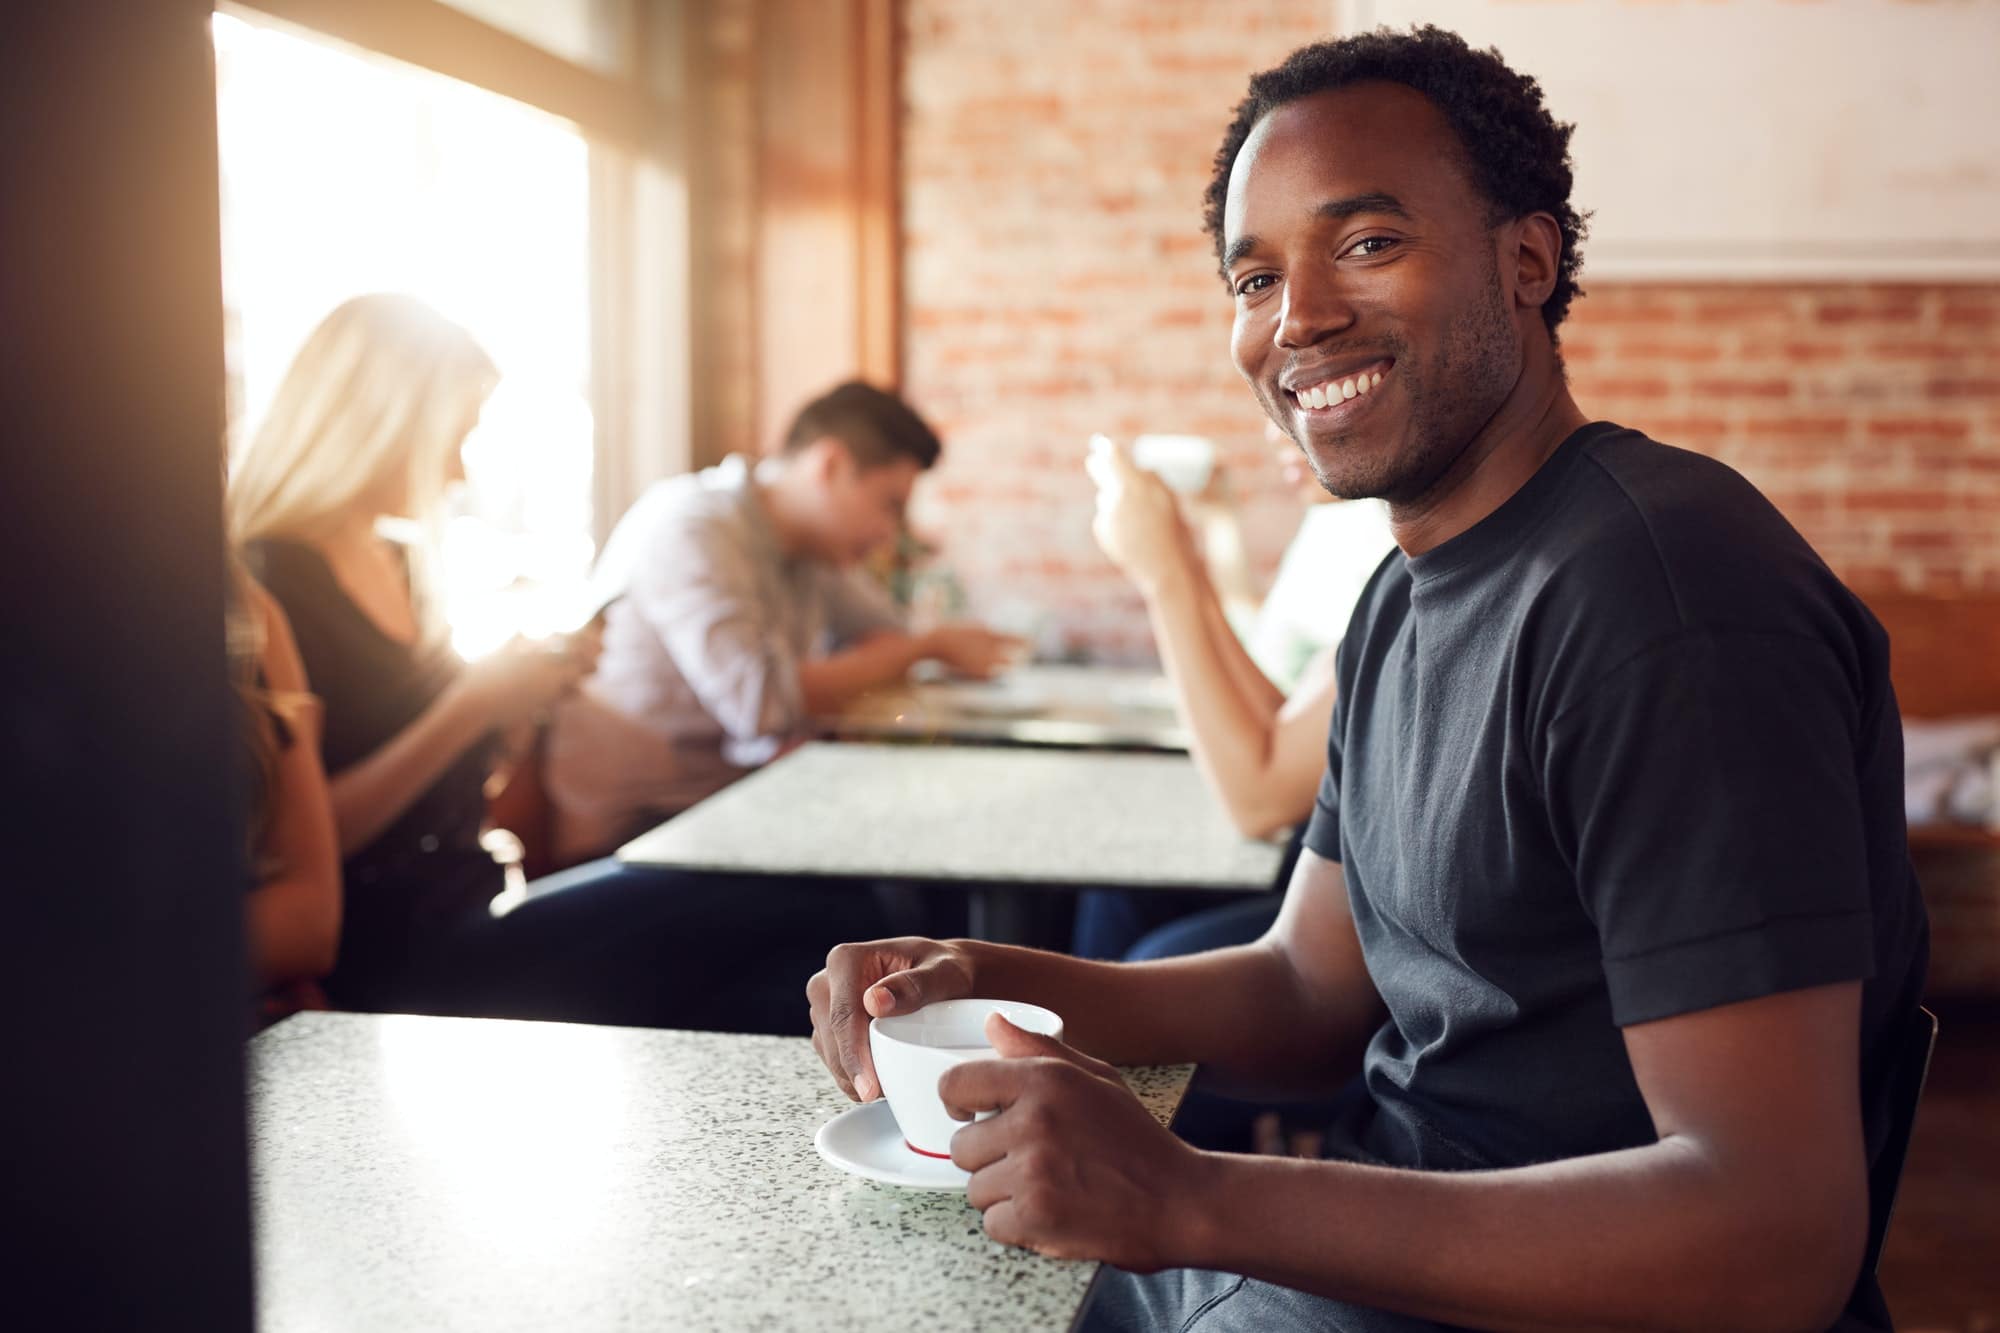 Portrait Of Smiling Man Sitting At Table In Coffee Shop